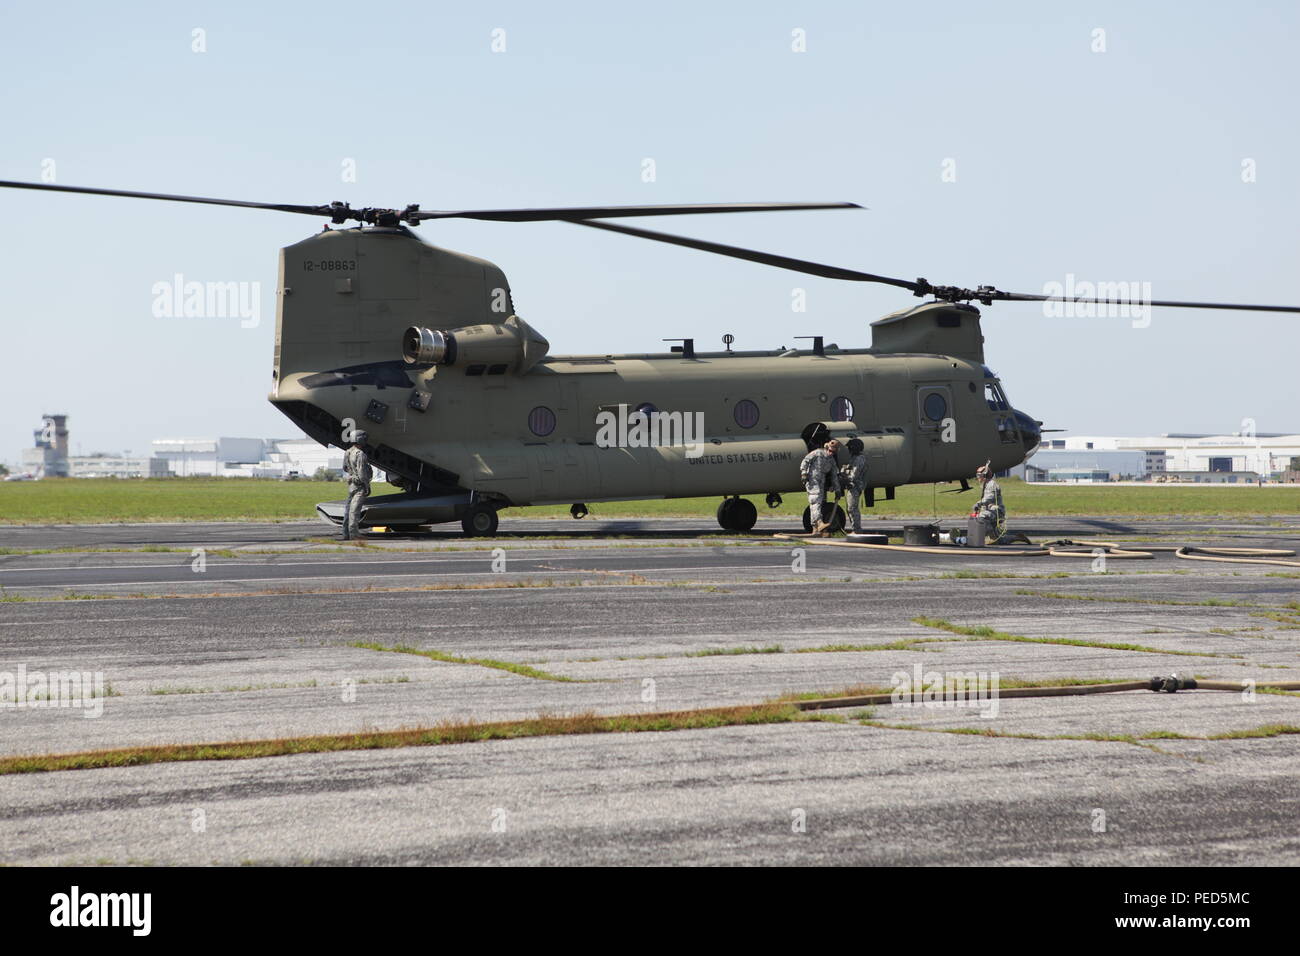 A U.S. Army CH-47 Chinook helicopter stops off at Quonset Air National Guard Base for refueling by Soldiers from the 126 Aviation Regiment, R.I. National Guard, during Leapfest 2015, Aug. 1, 2015. Leapfest is an International parachute competition hosted by the 56th Troop Command, Rhode Island National Guard to promote high level technical training and esprit de corps within the International Airborne community. (U.S. Army Photo by Sgt. 1st Class Horace Murray/Released) Stock Photo